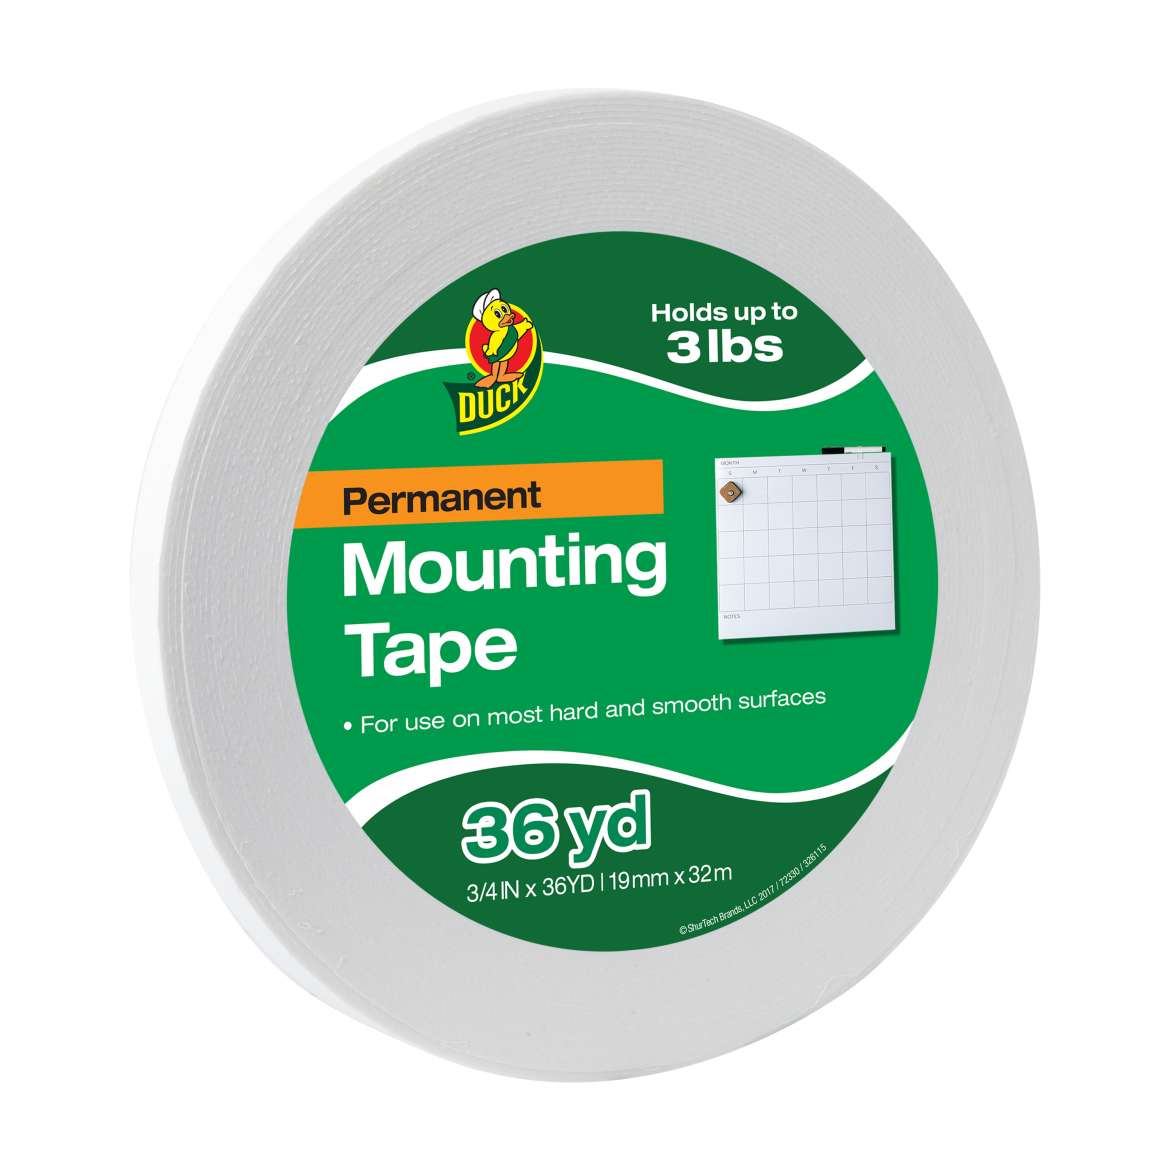 Permanent Mounting Tape Image